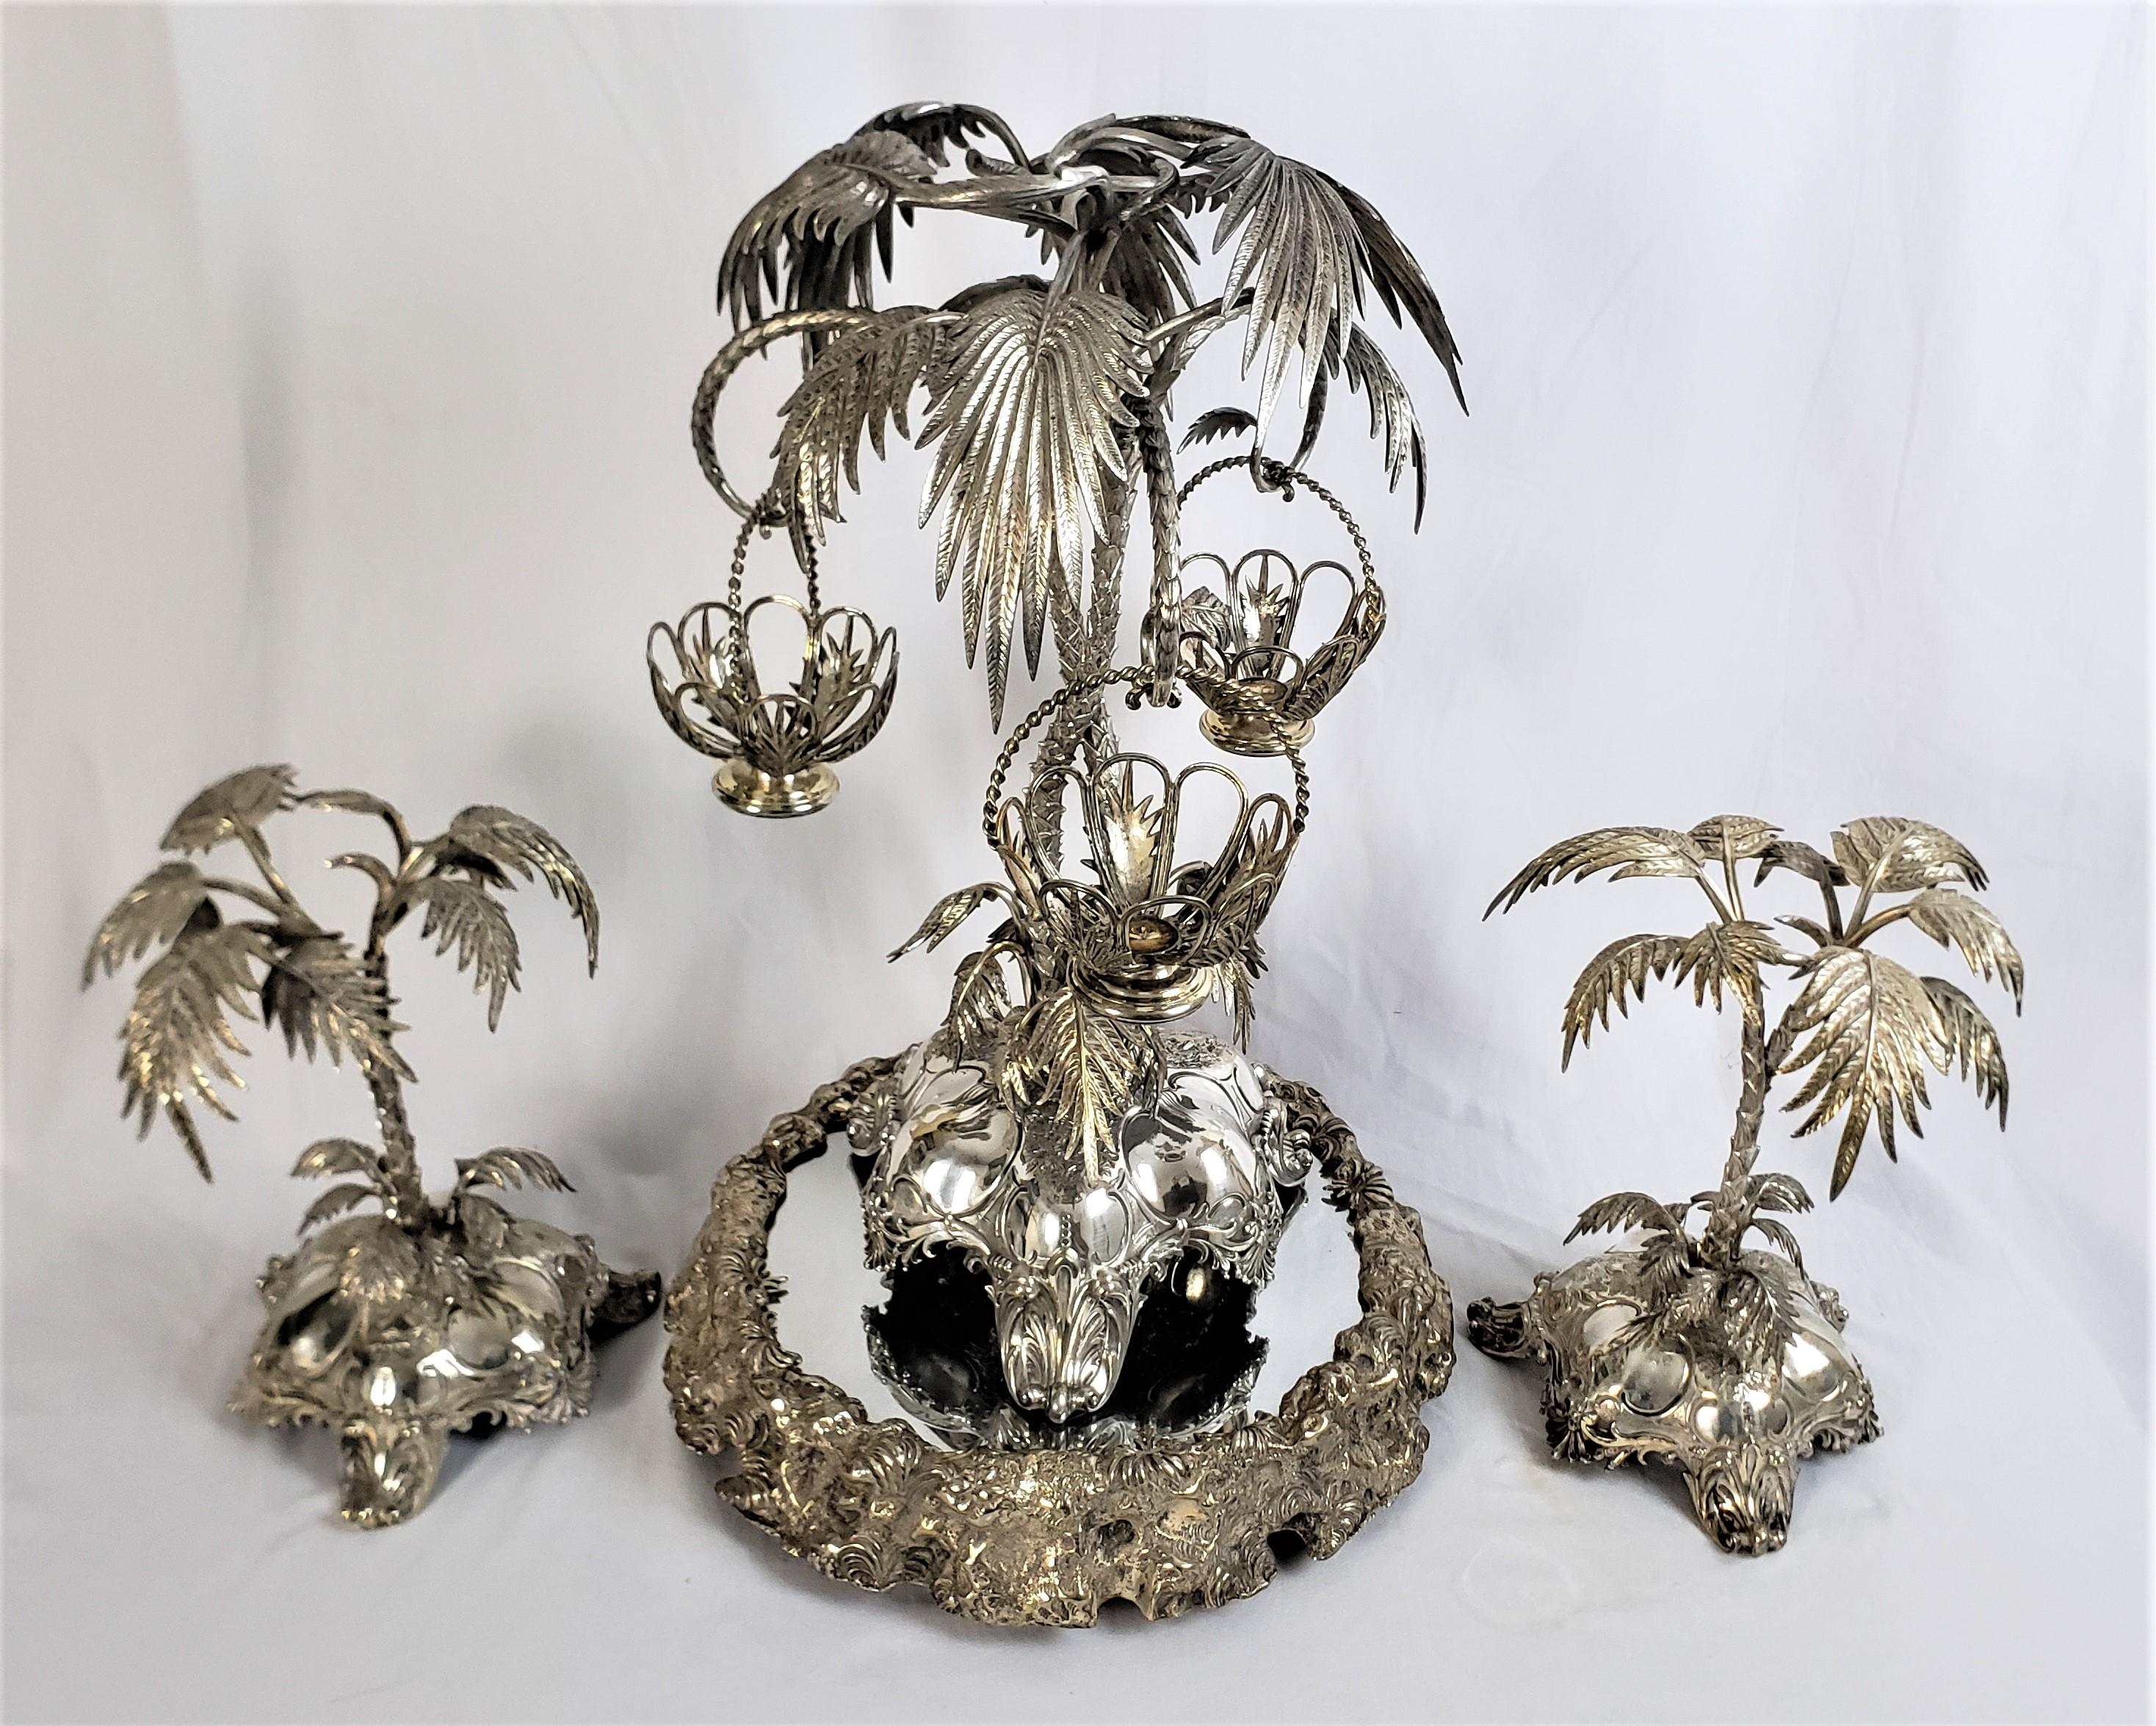 Huge Antique Silver Plated Anglo-Indian Styled Figural Palm Tree Centerpiece Set For Sale 3